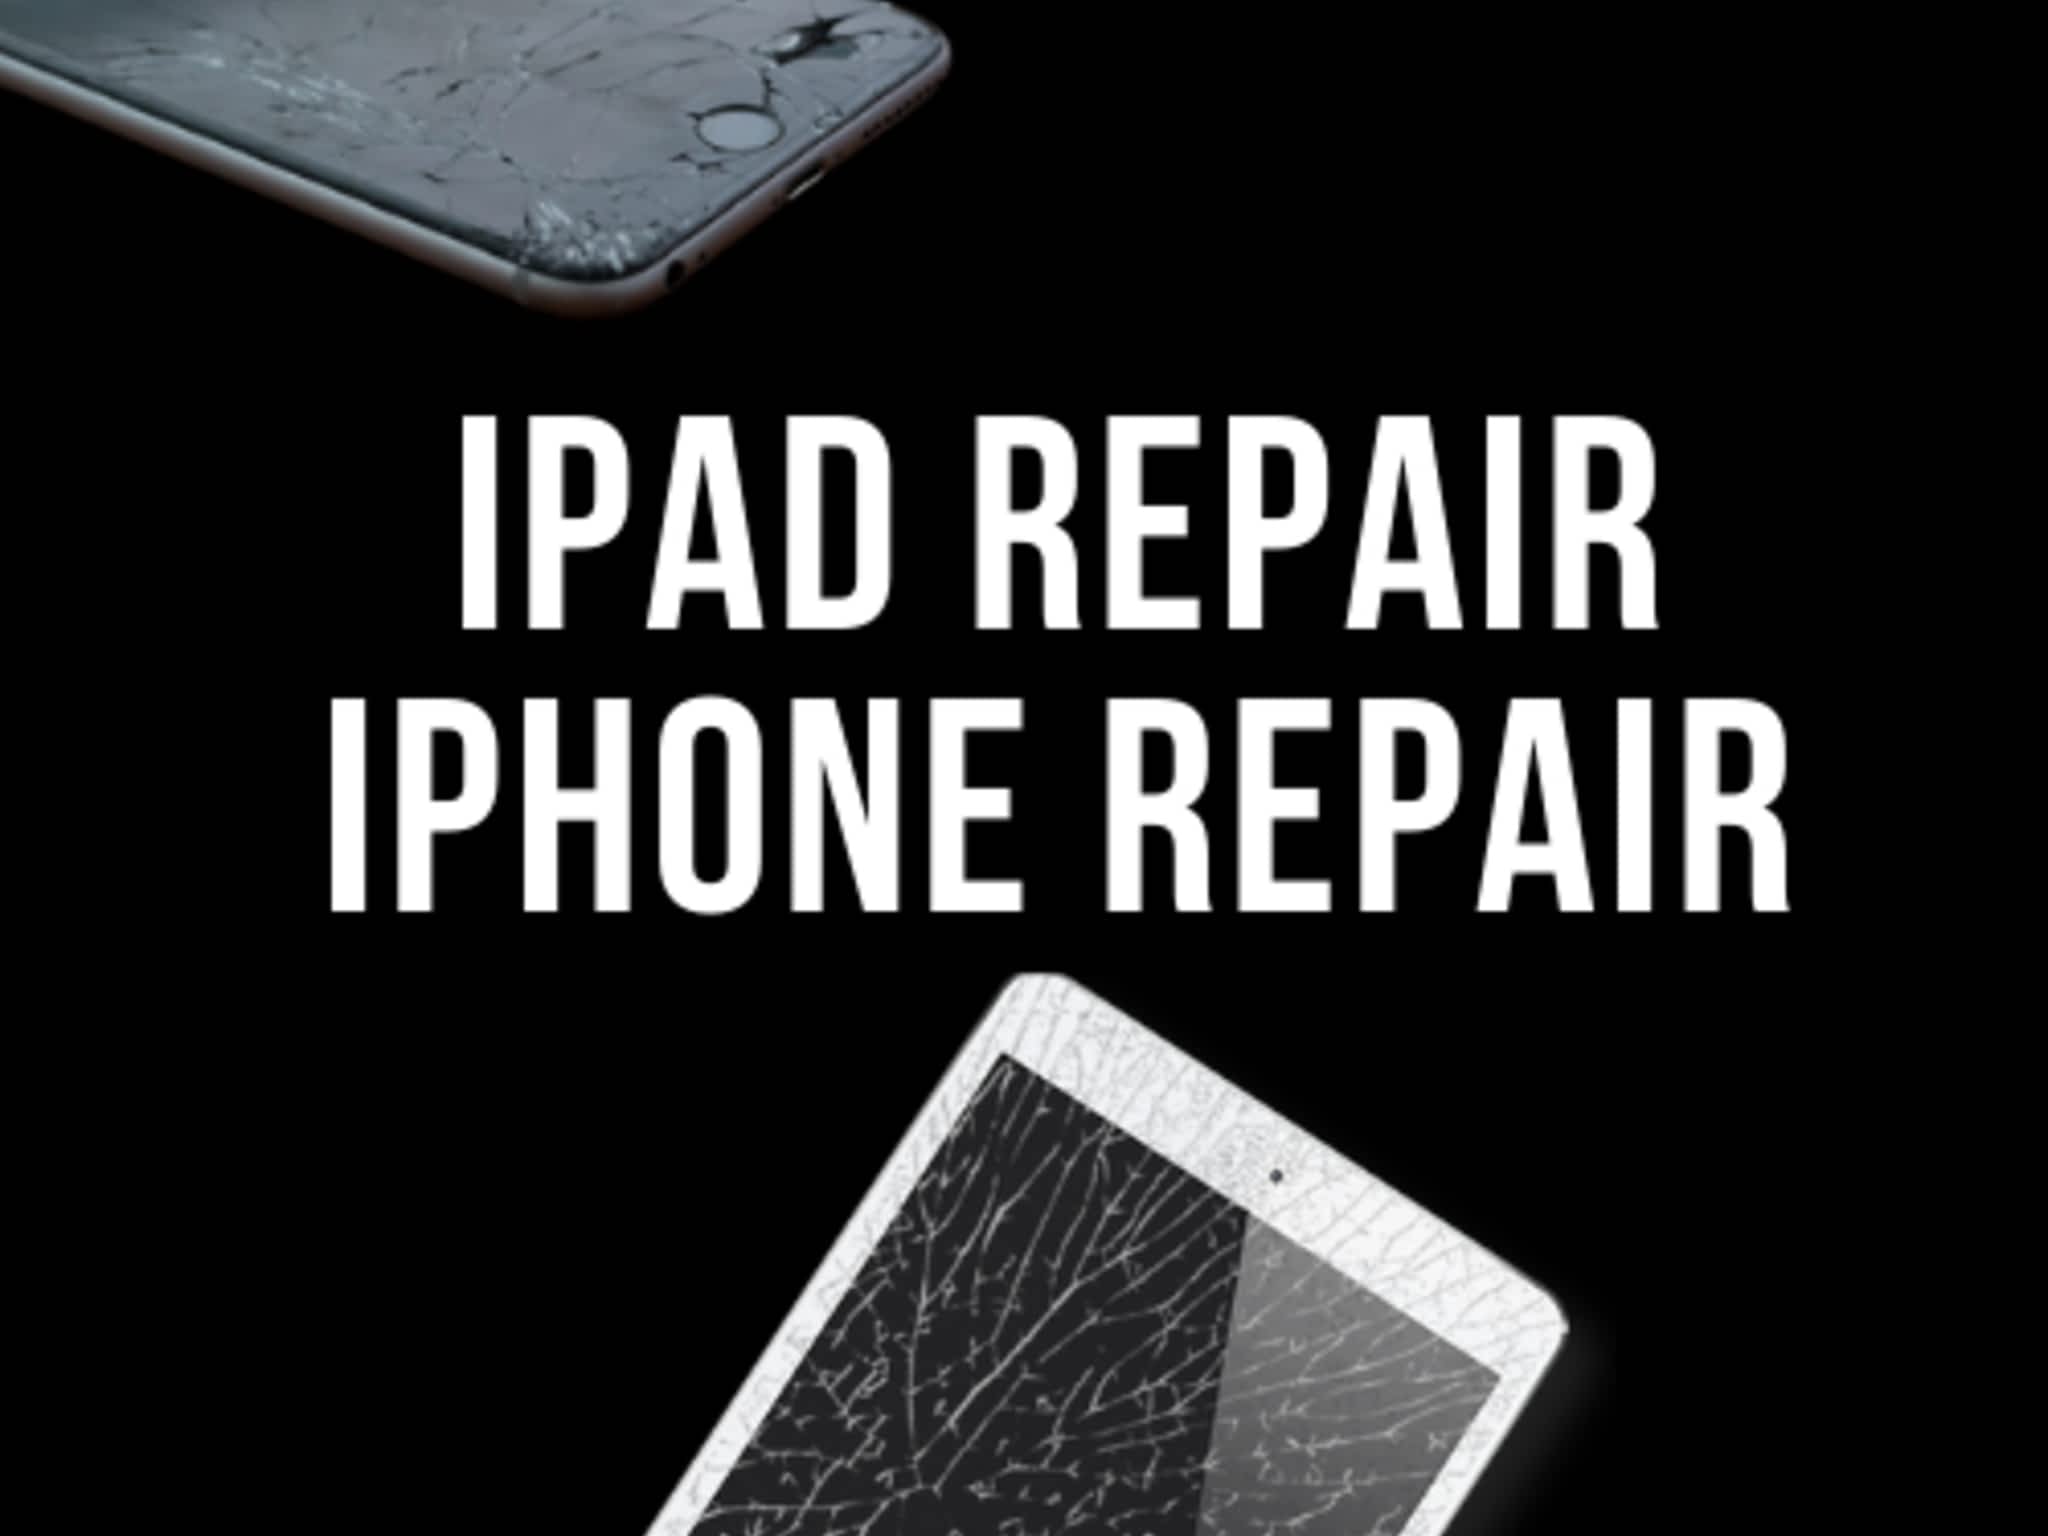 photo JTG Systems - Computer Repair and Cell Phone Repair Experts